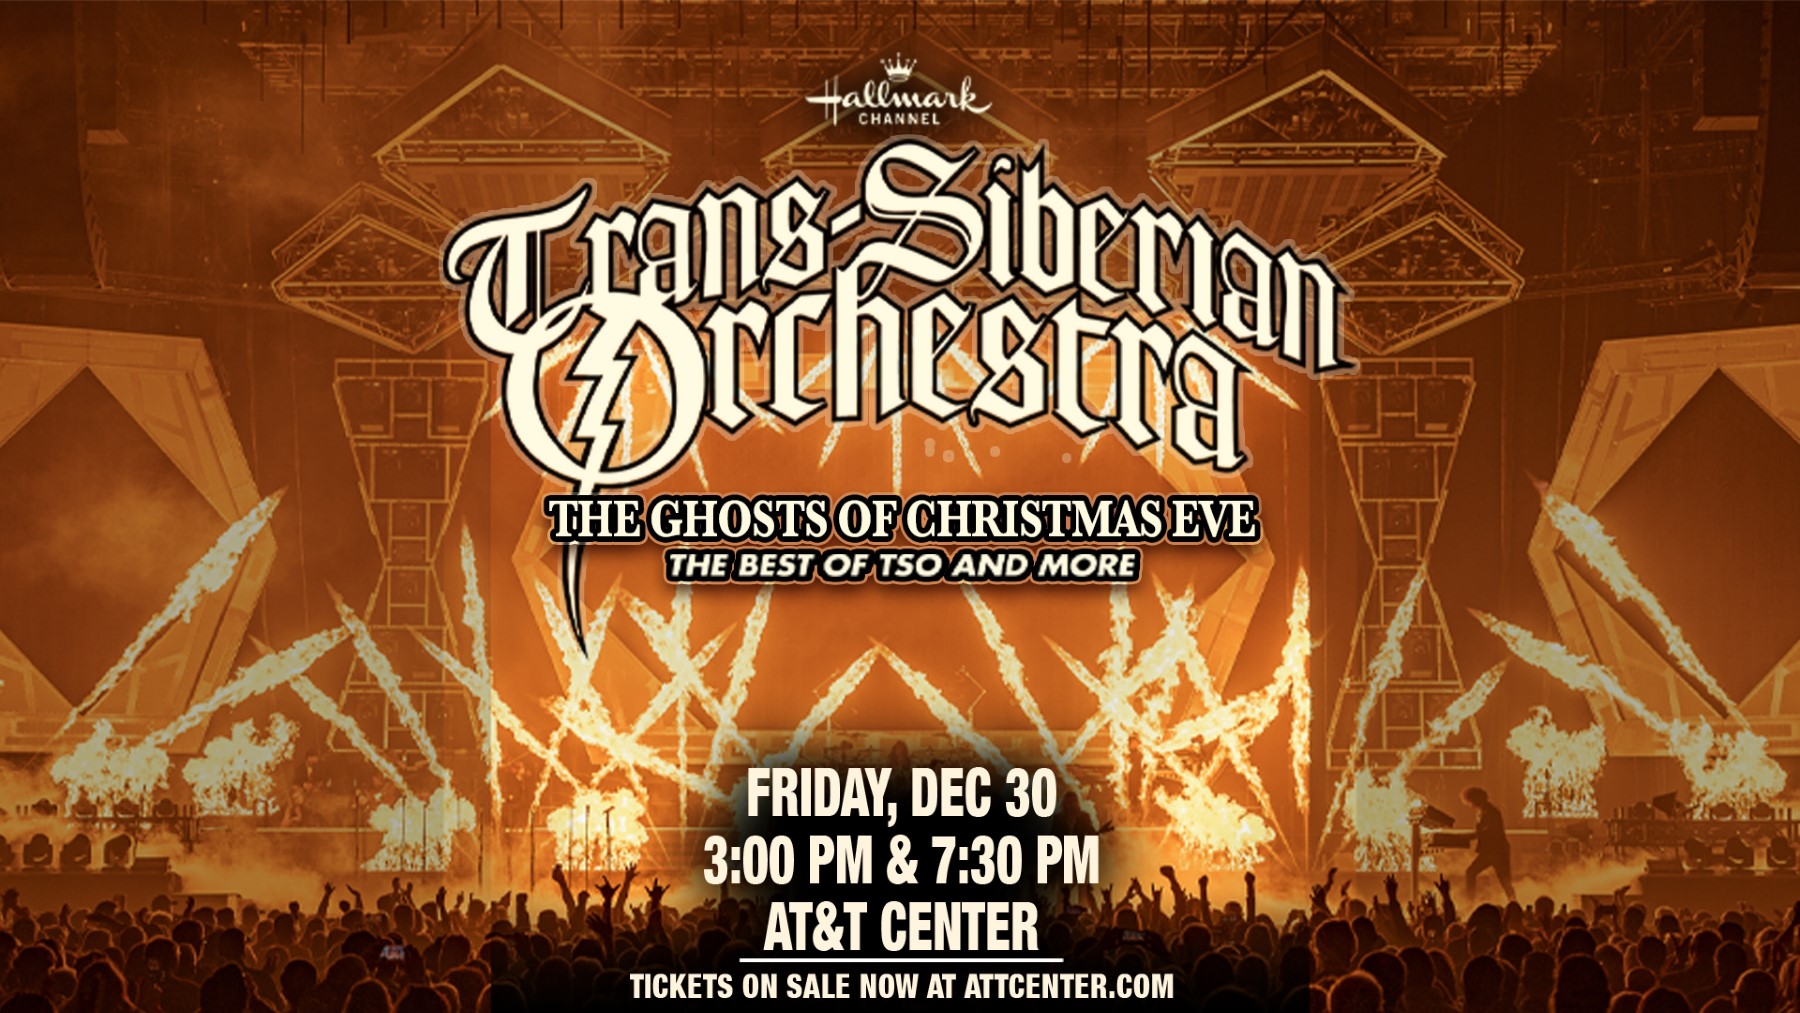 Trans-Siberian Orchestra - The Ghosts of Christmas Eve - the best of TSO and more - December 2022 - AT&T Center